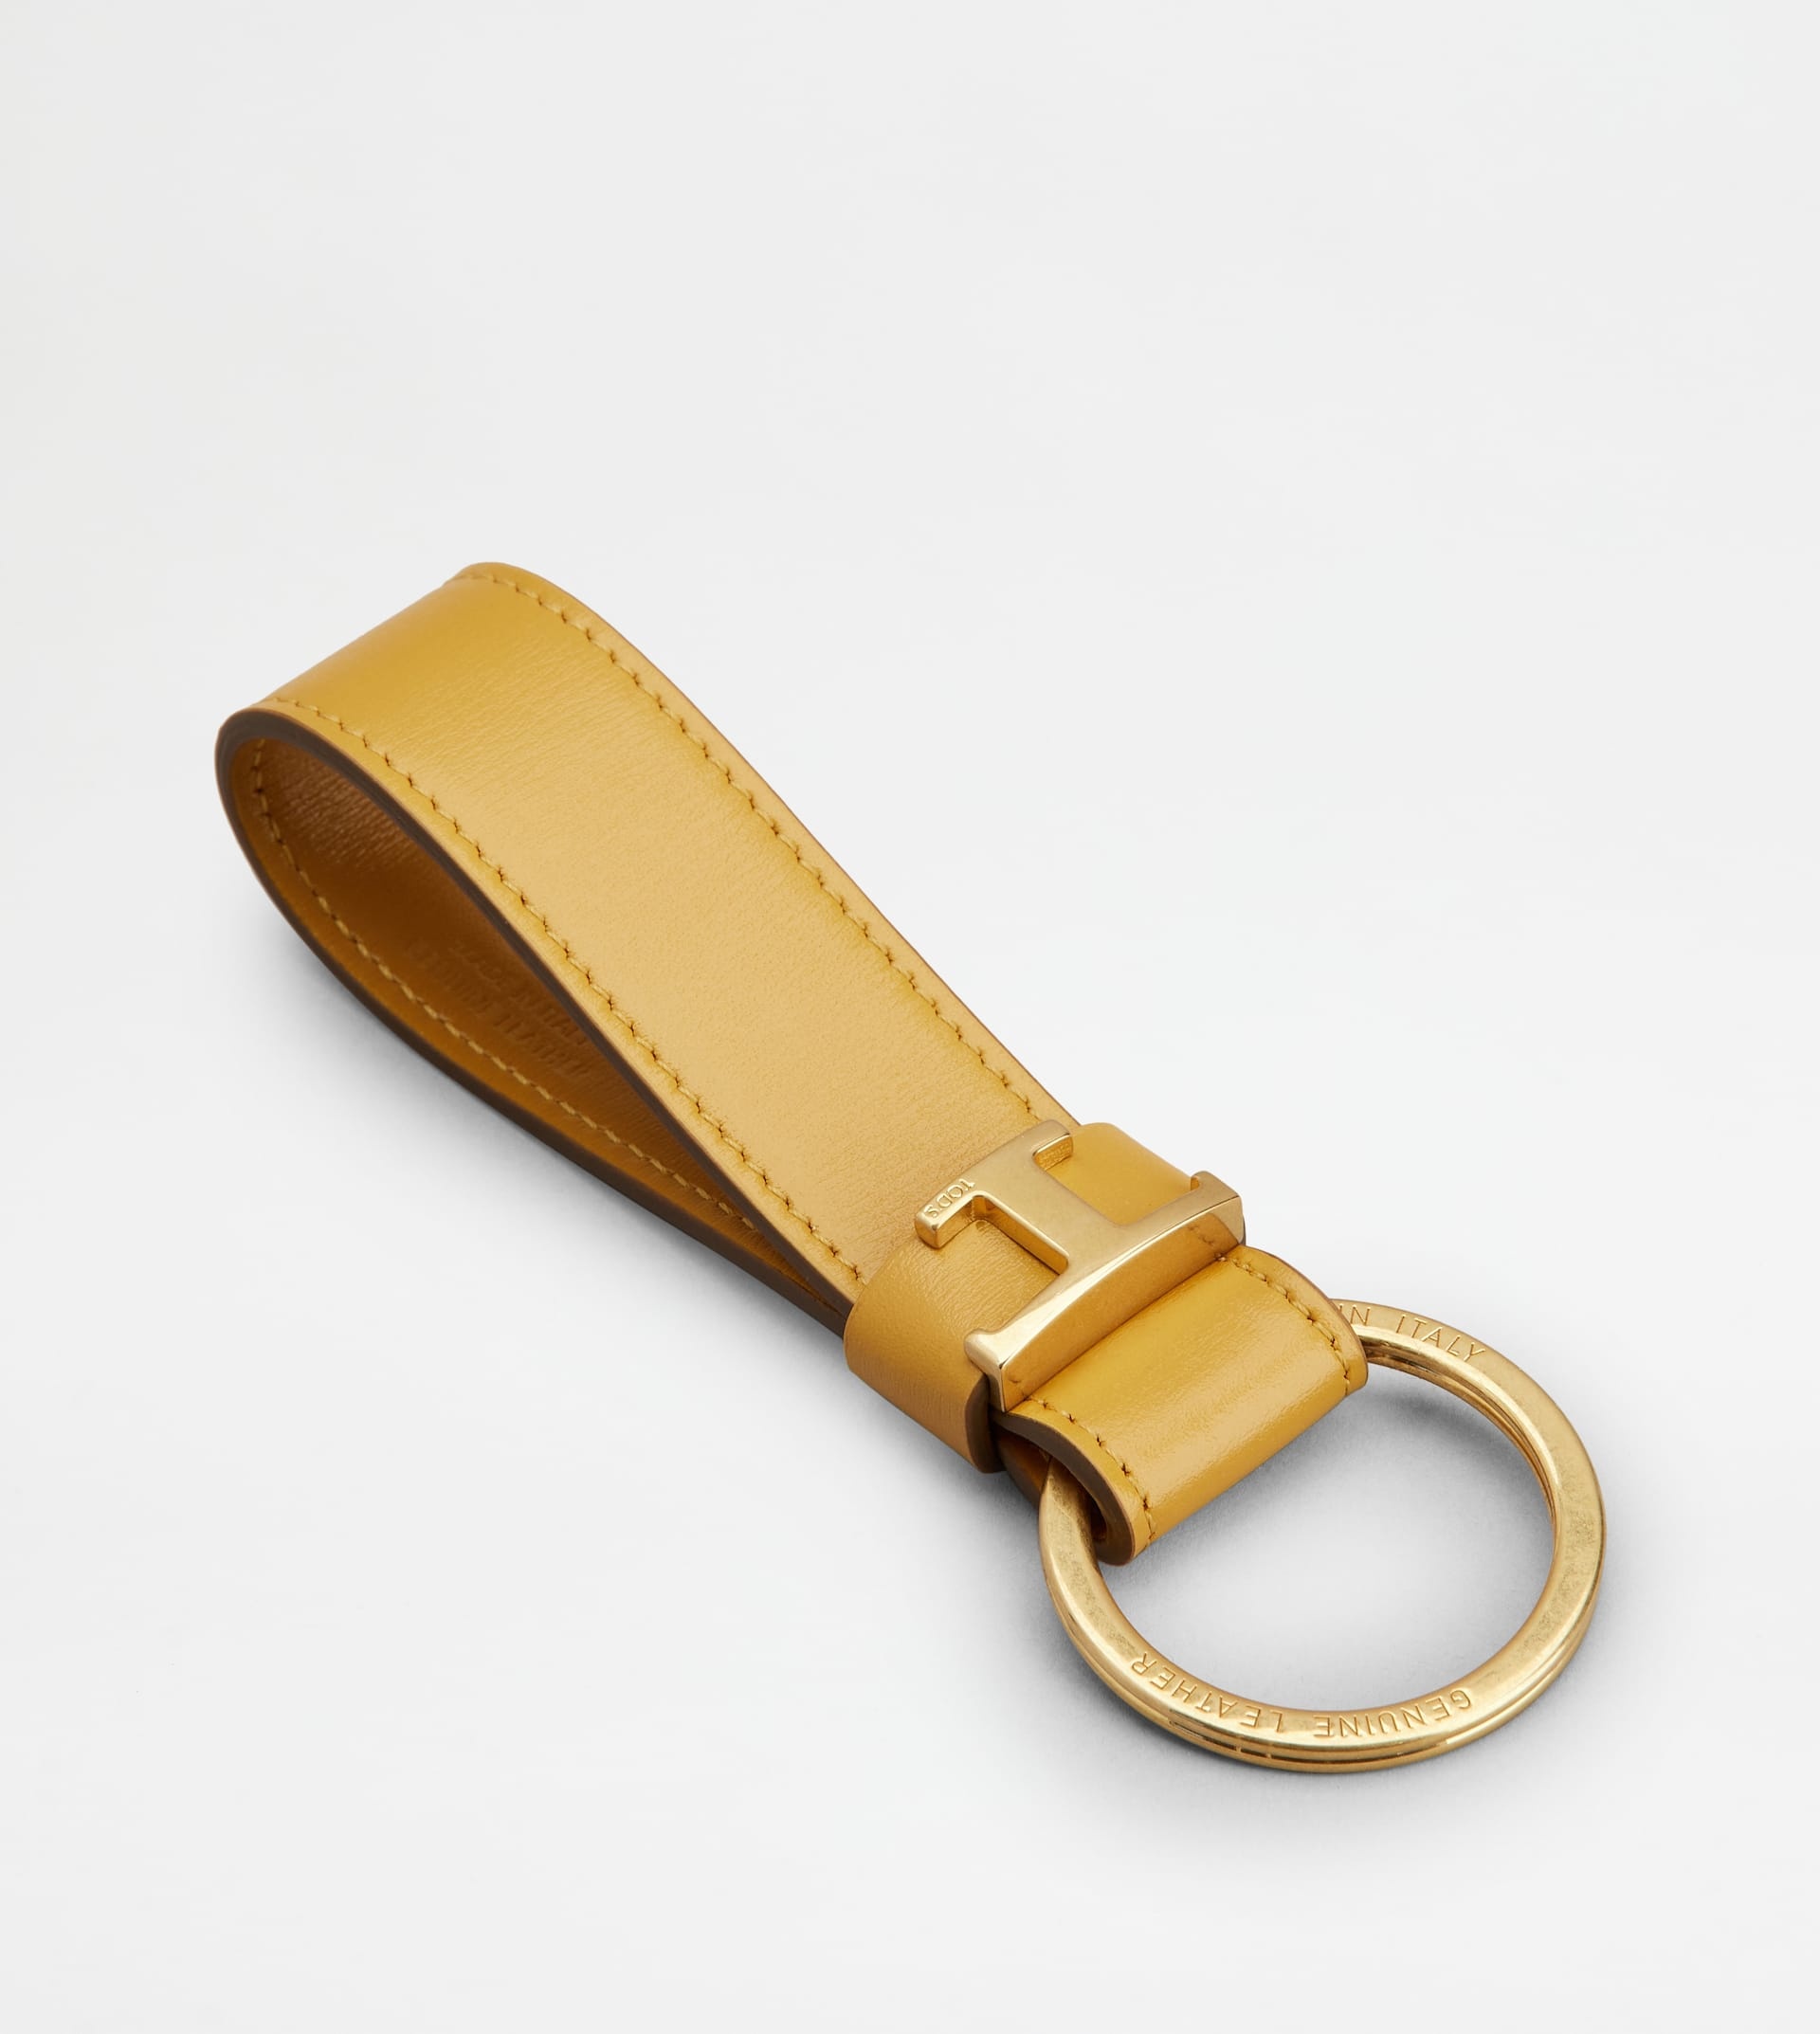 KEY HOLDER IN LEATHER - YELLOW - 2